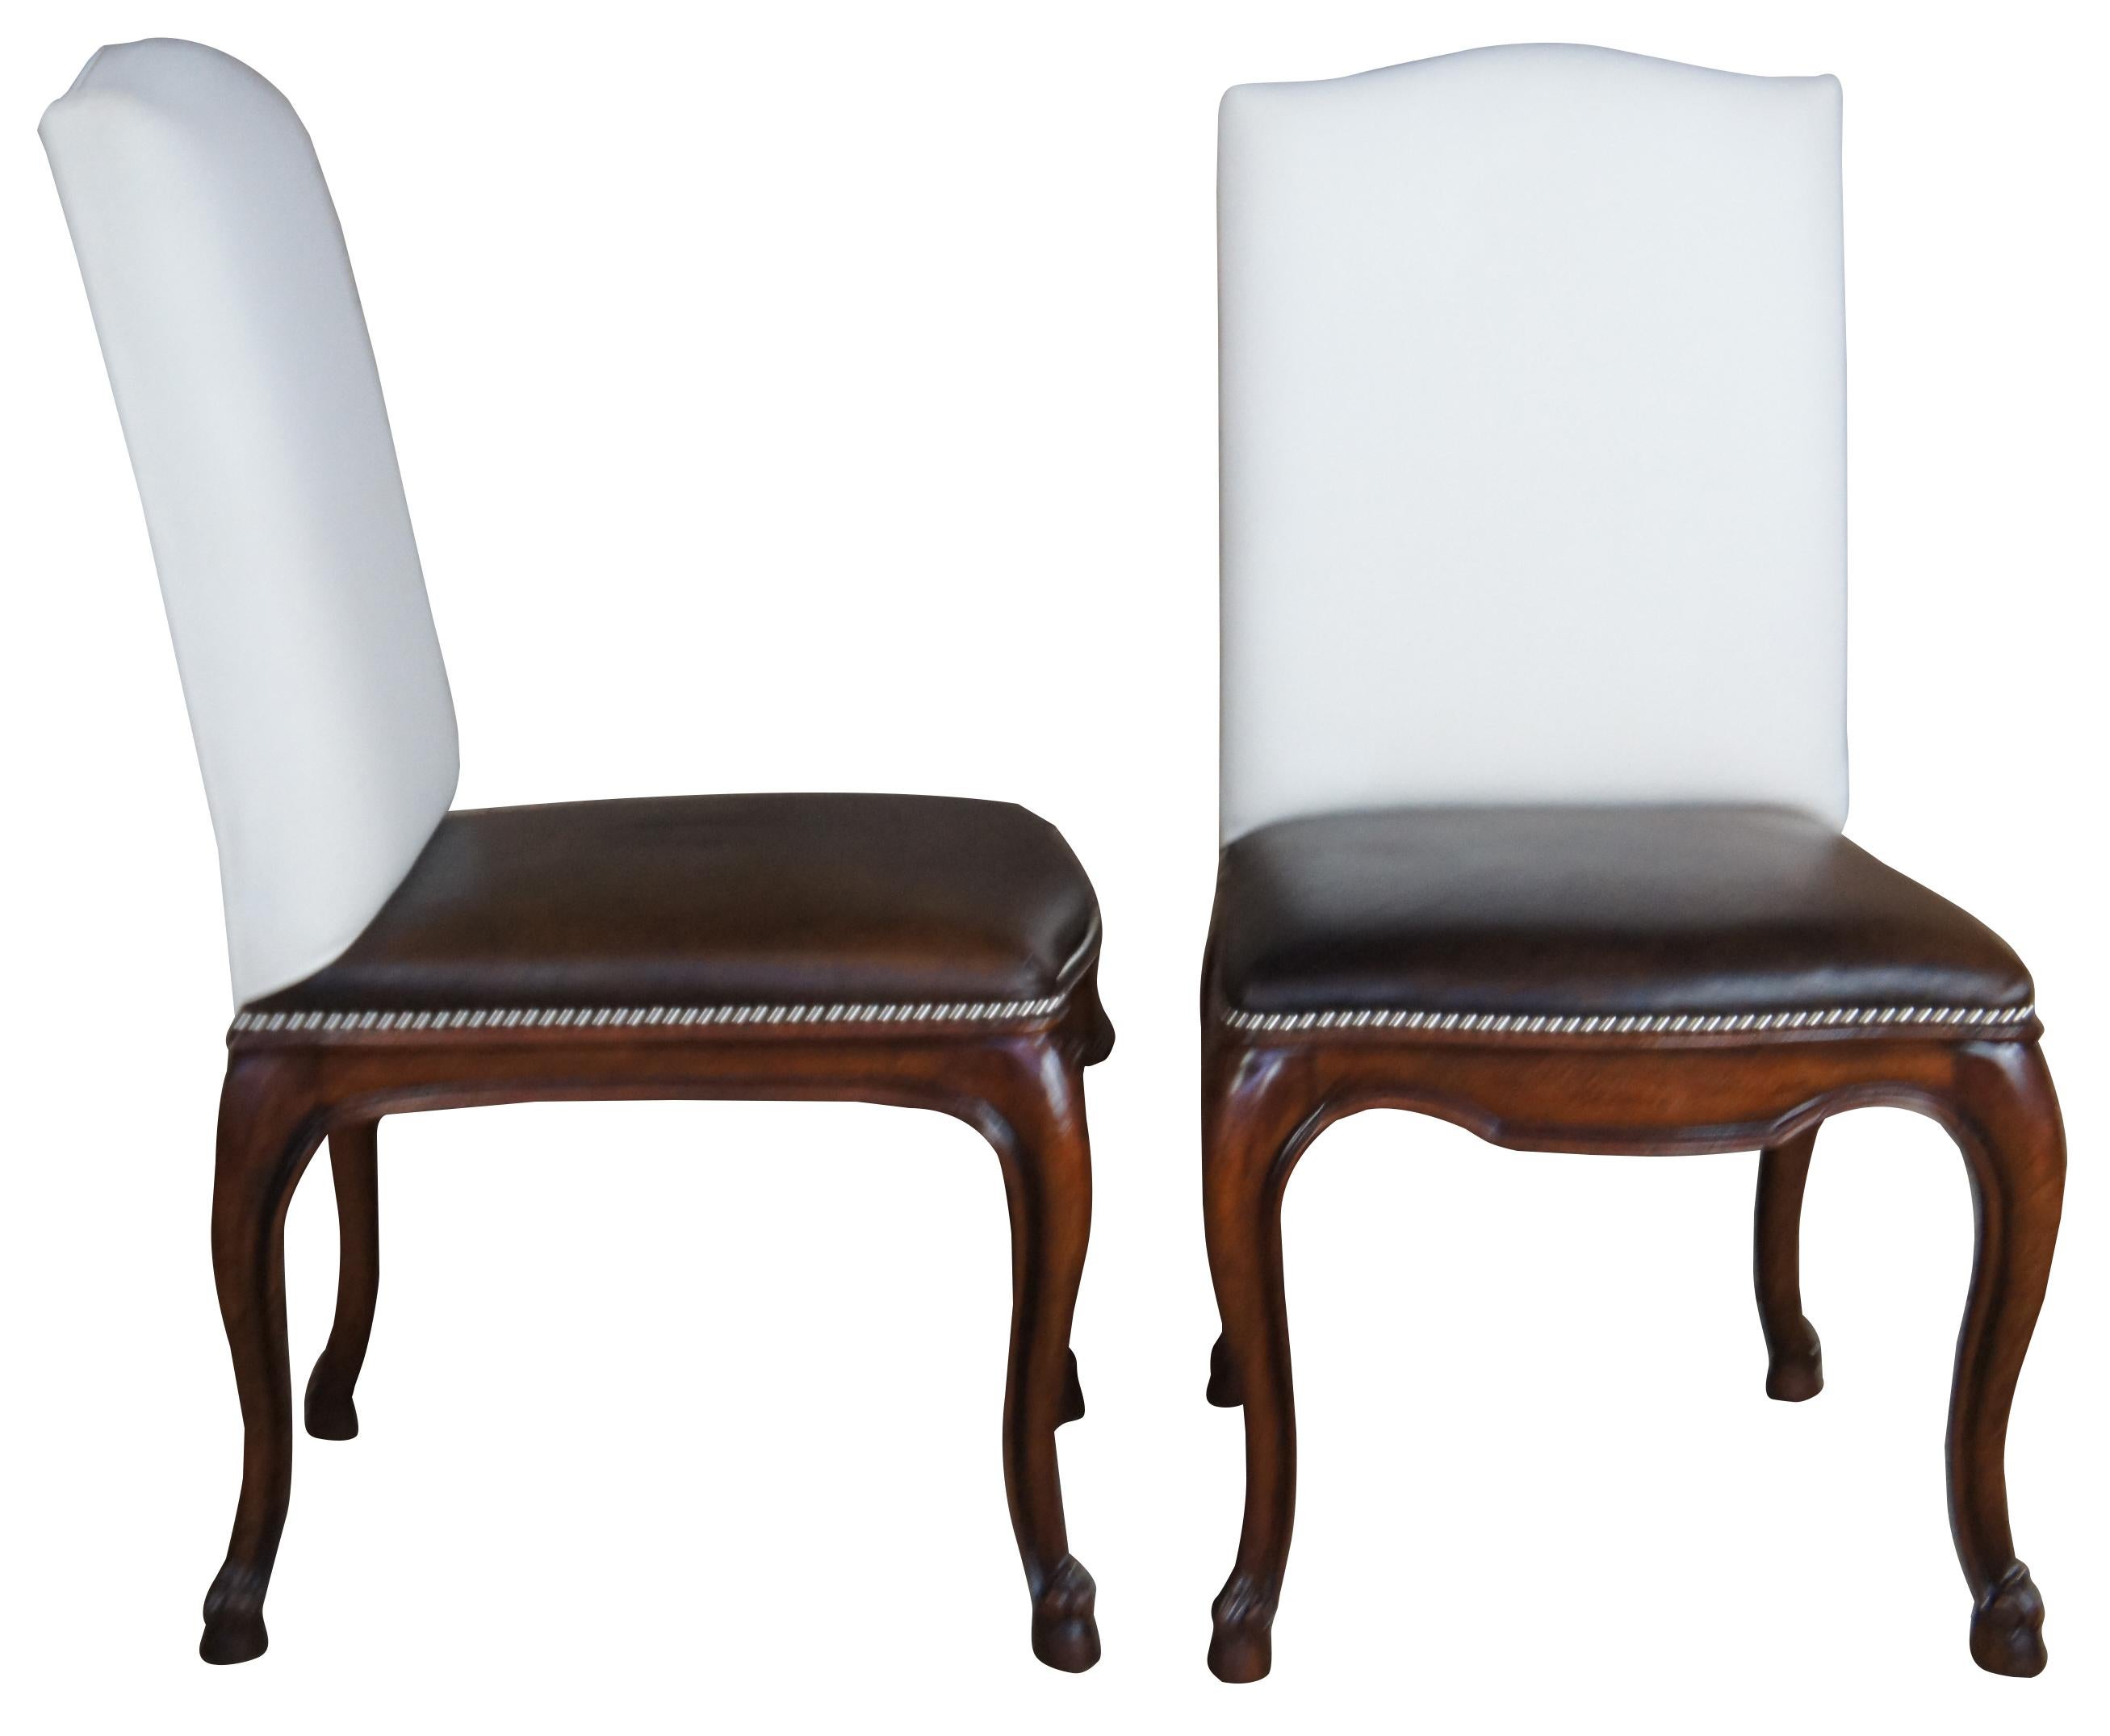 The Henredon Ralph Lauren Duke chair evokes traditional styling. Made from mahogany with leather seat and upholstered back. Features cabriole legs that lead to a hoof foot. Marked on underside. 1865-28-50.
  